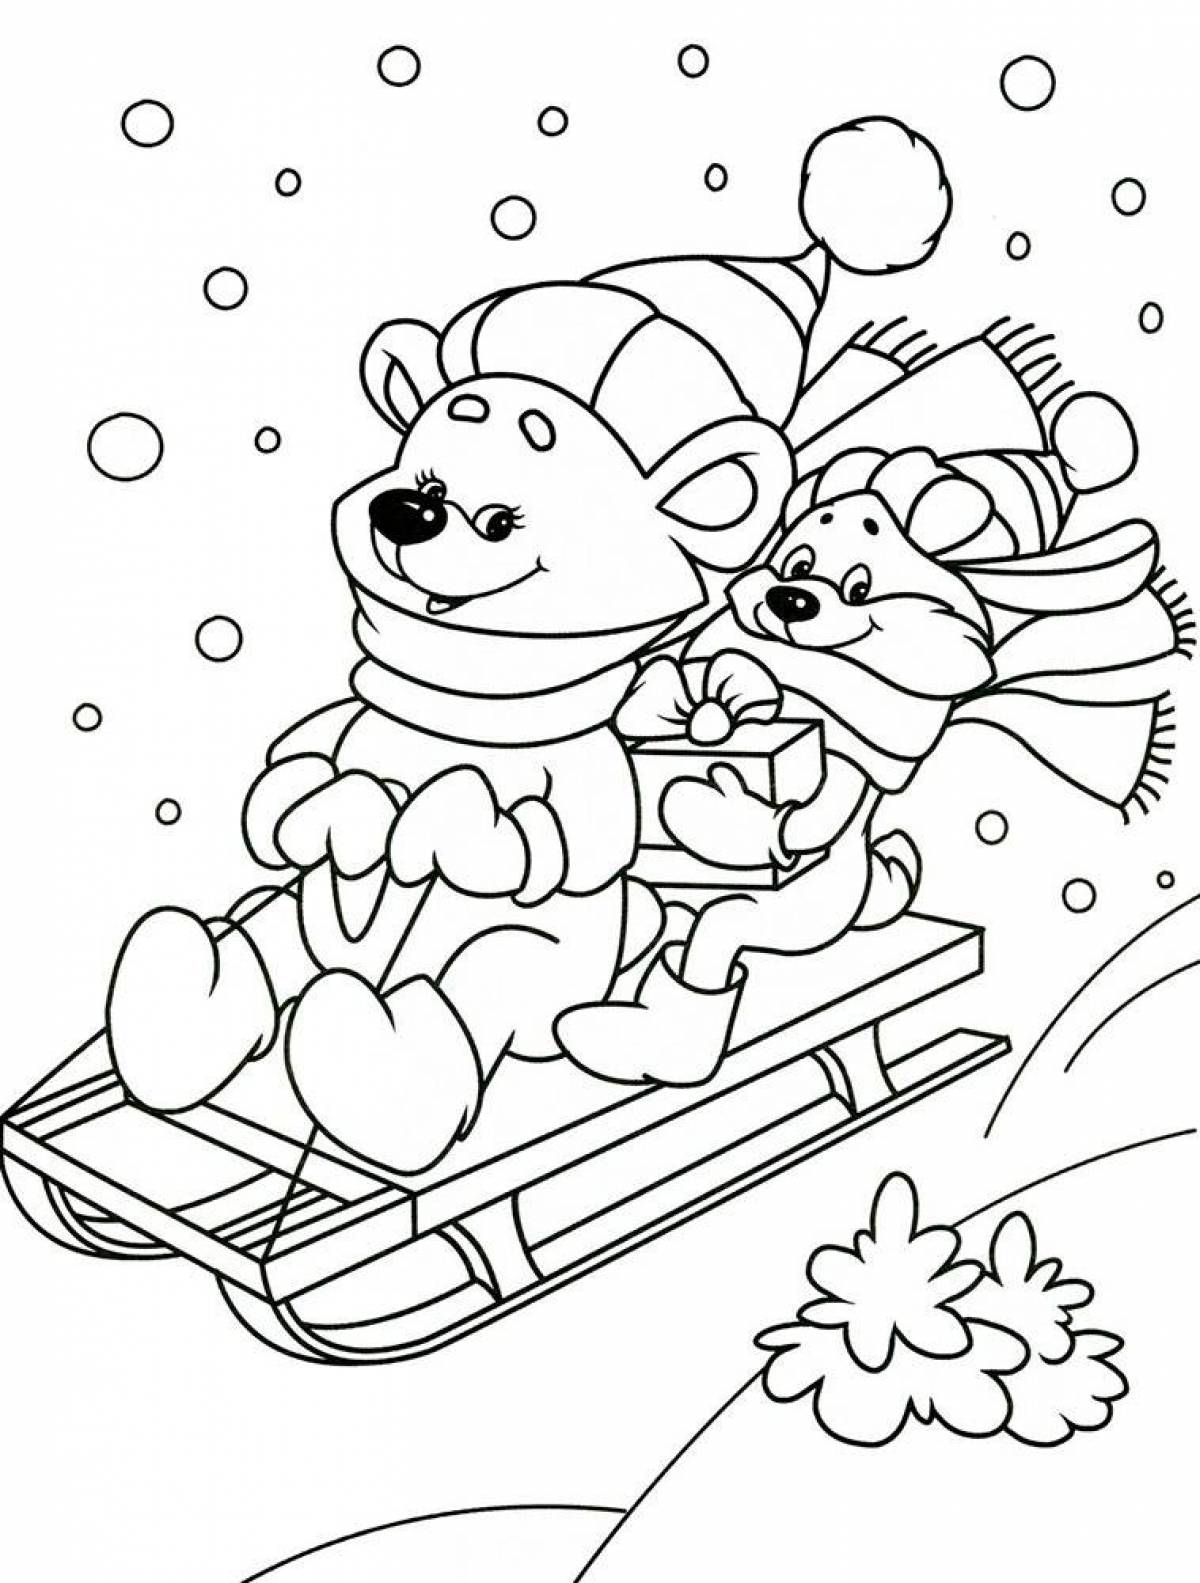 Fairytale winter coloring book for children 6-7 years old